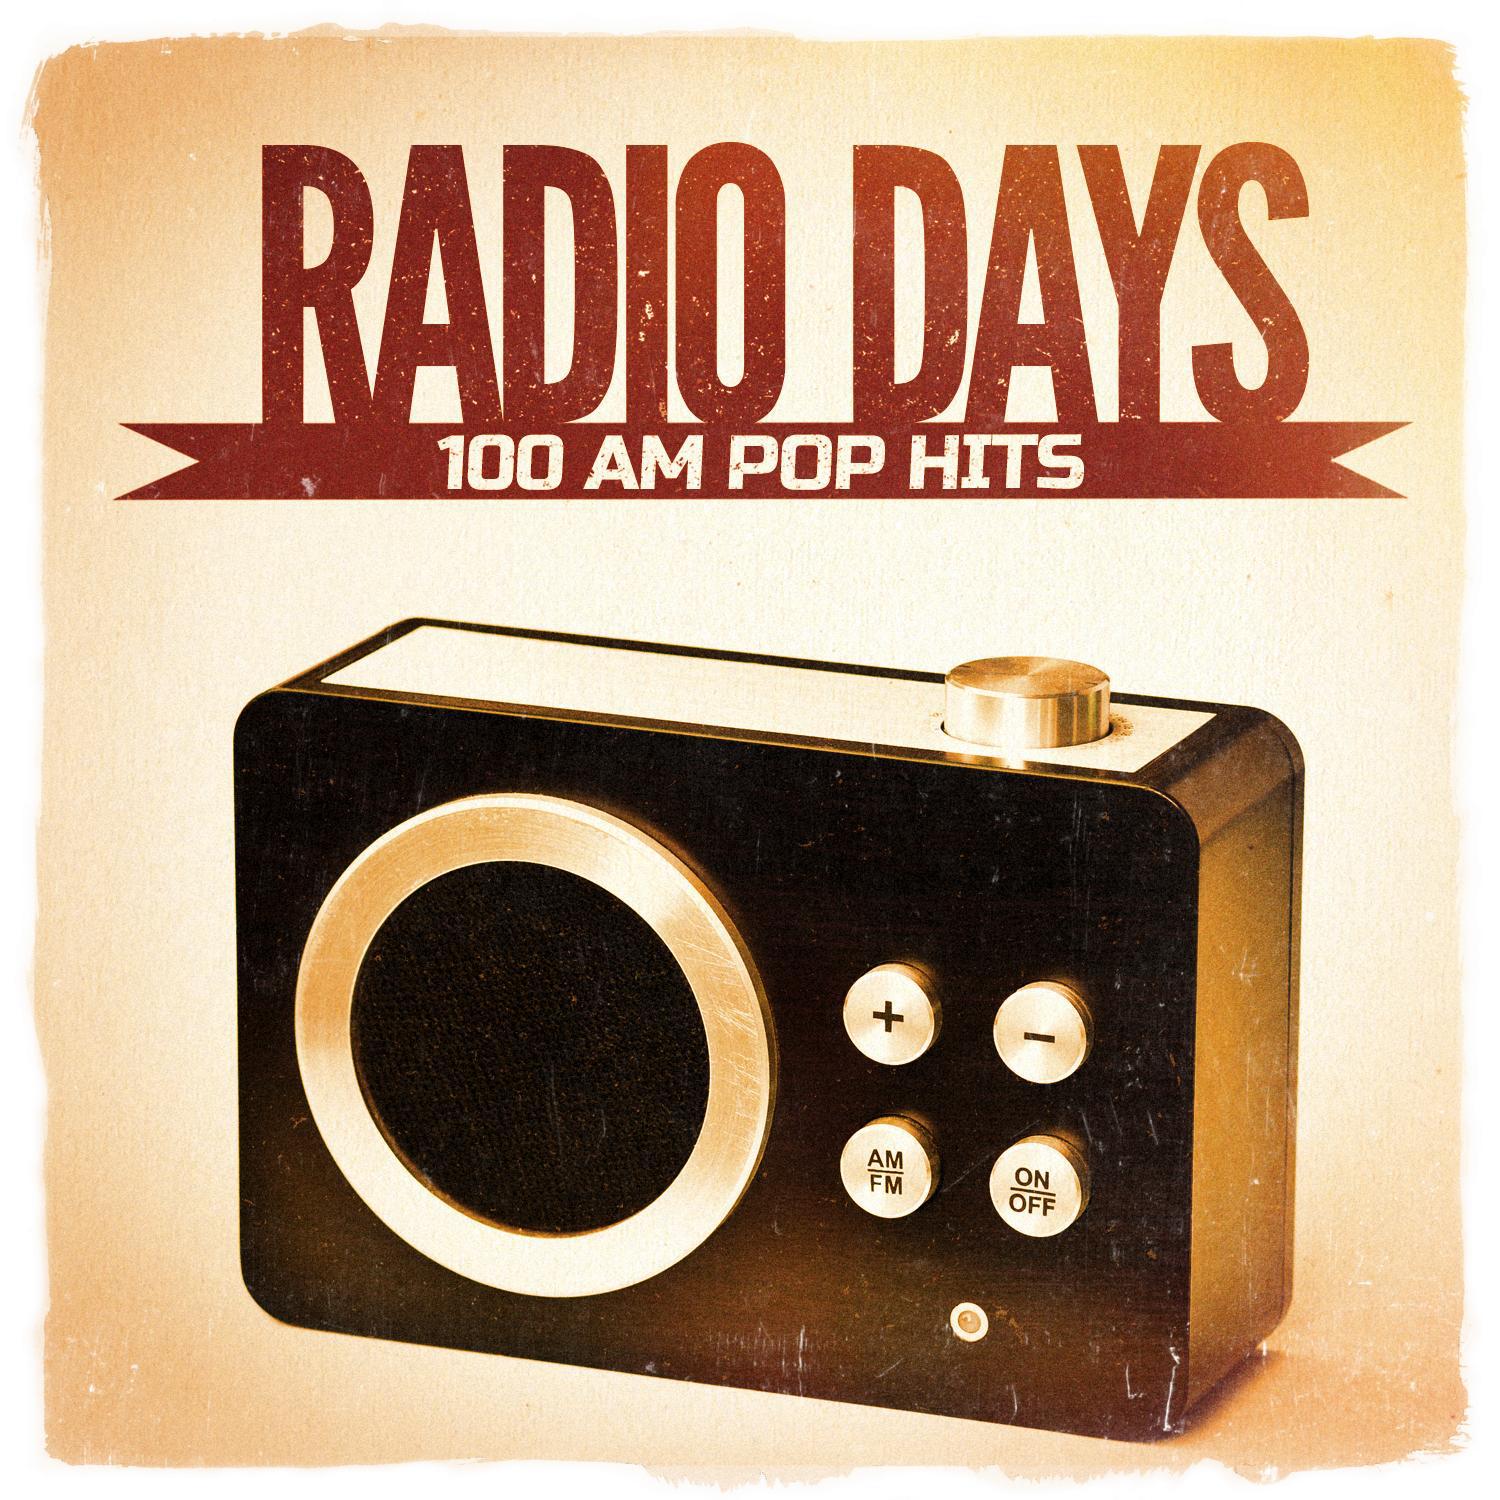 Radio Days, Vol. 2: 100 Am Pop Hits from the 60's and 70's